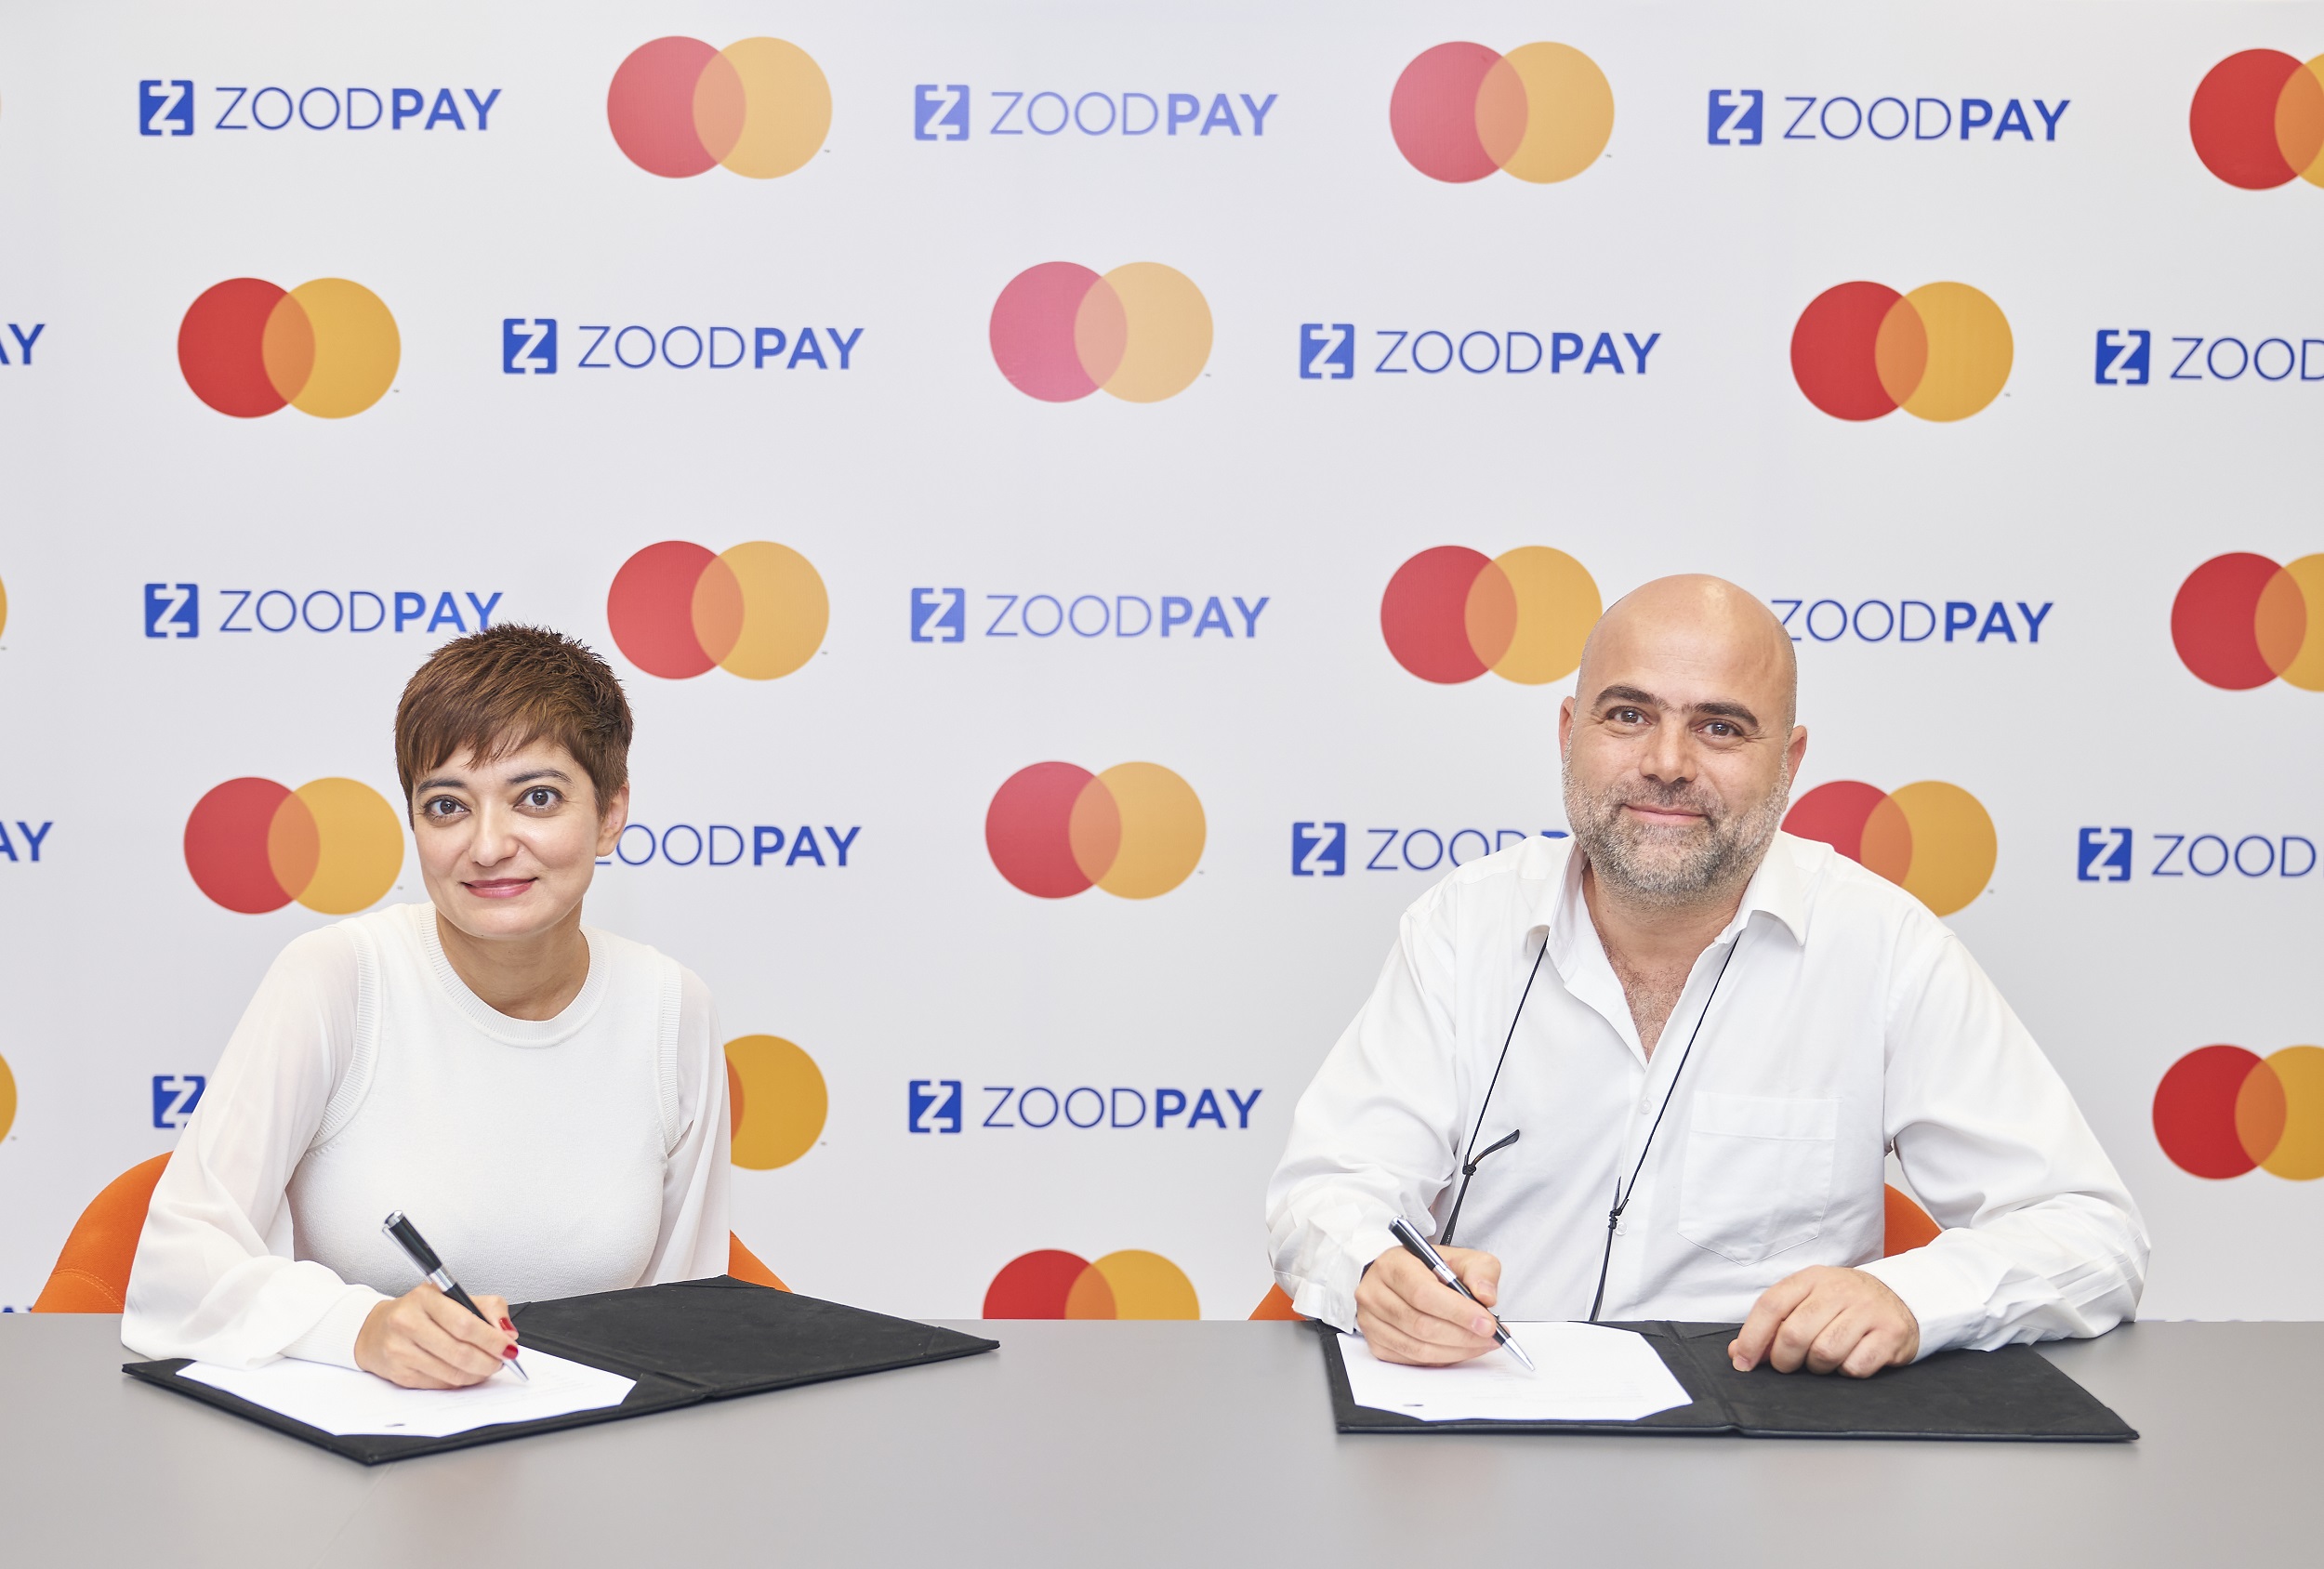 Mastercard and ZoodPay join forces to launch first virtual installment card across EEMEA